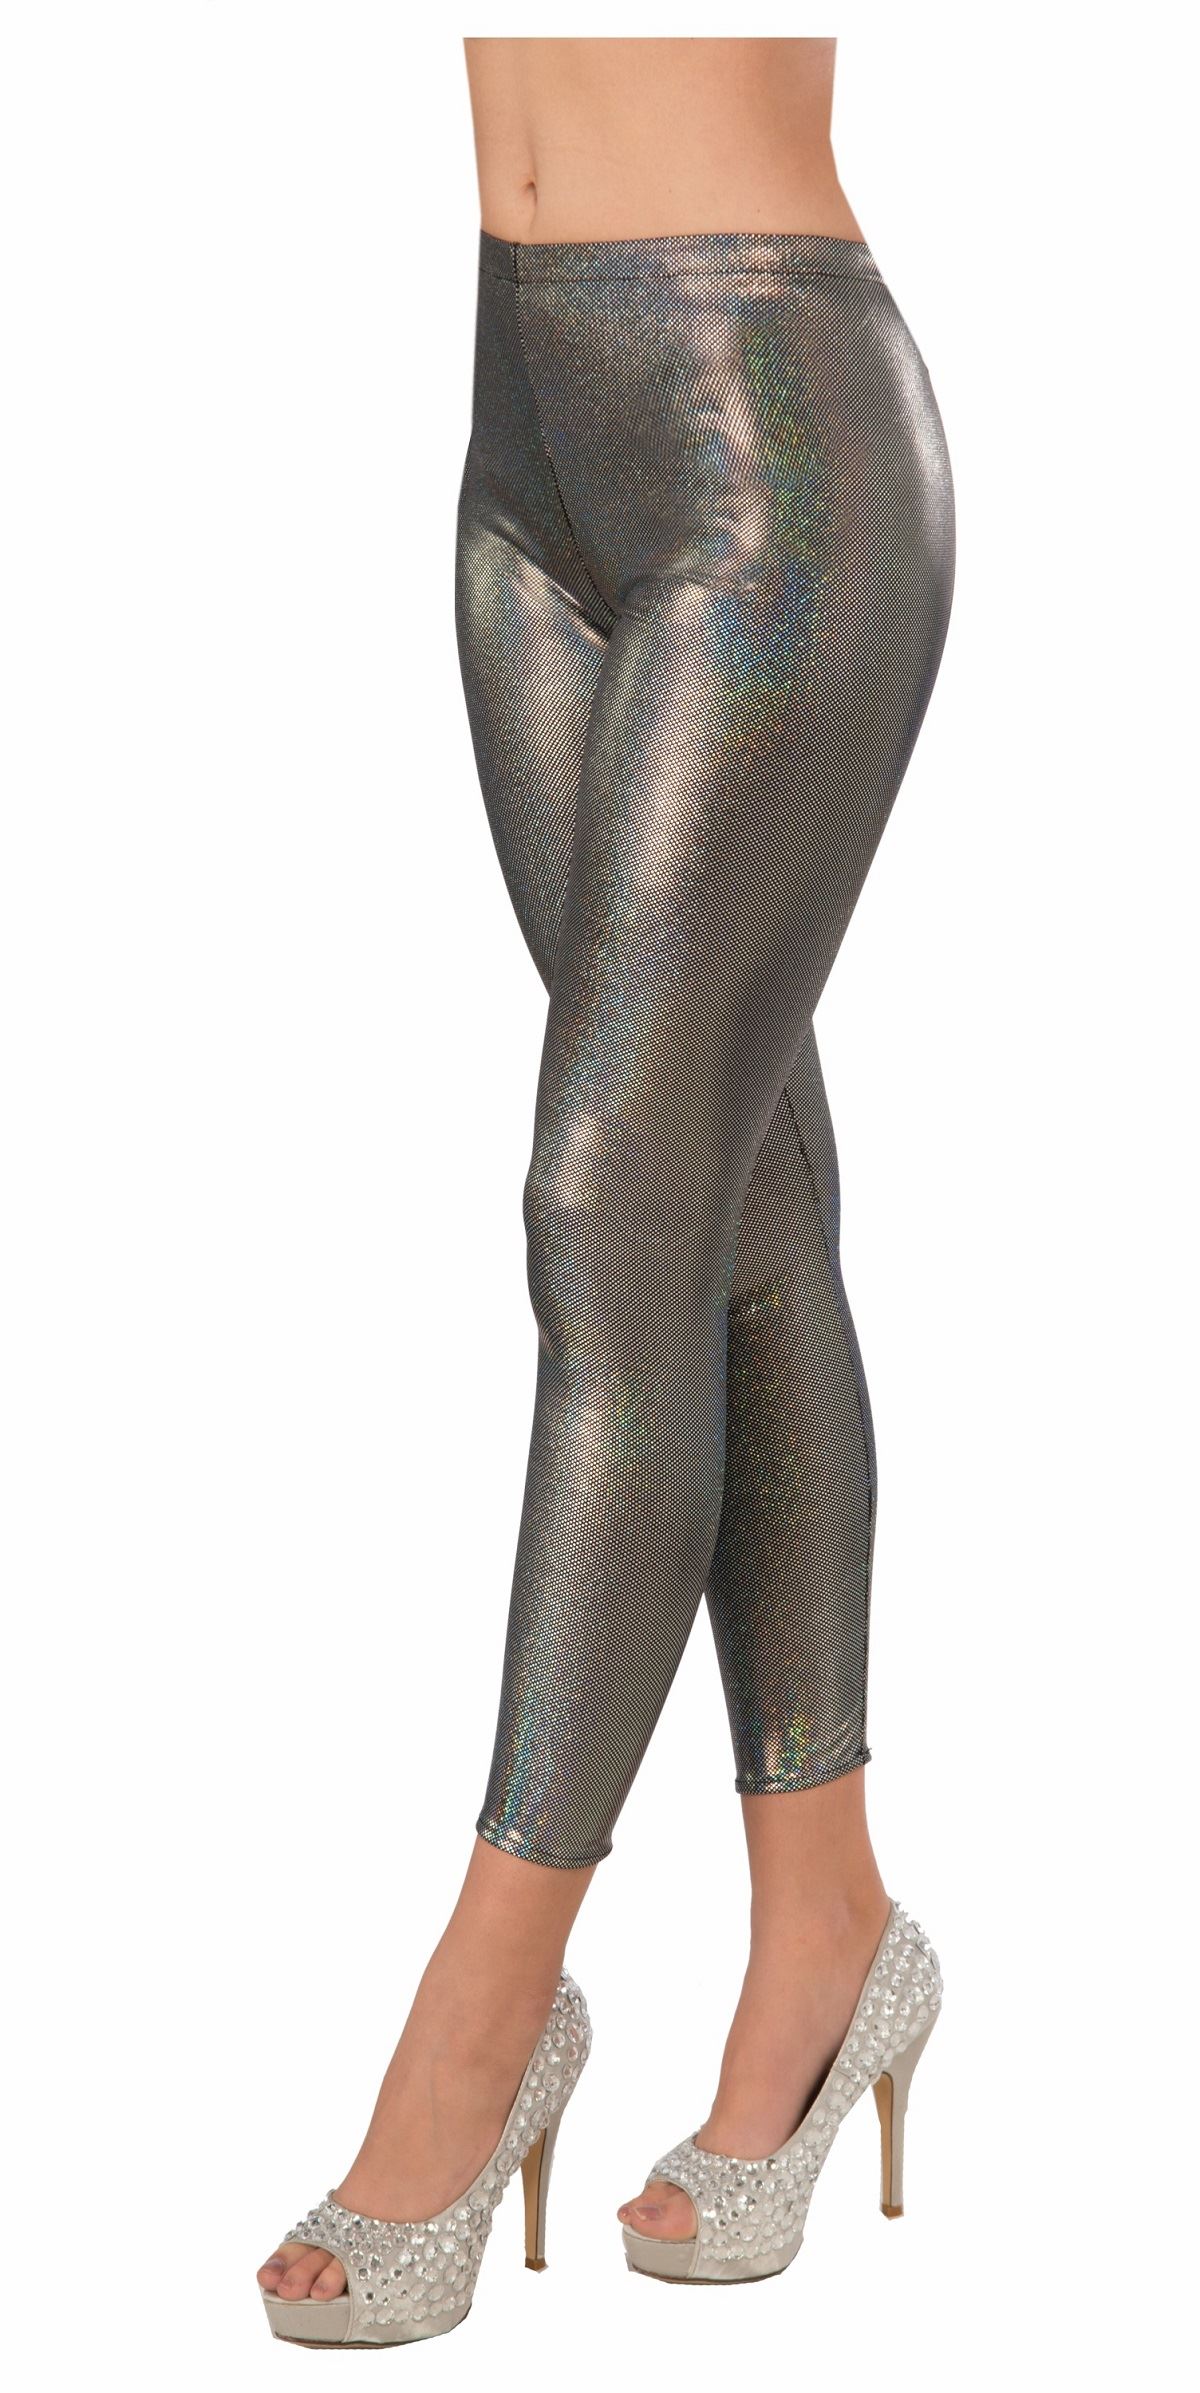 Womens Metallic Shiny Leggings Wet Look Stretchy Pants for Dance Party Club  | eBay